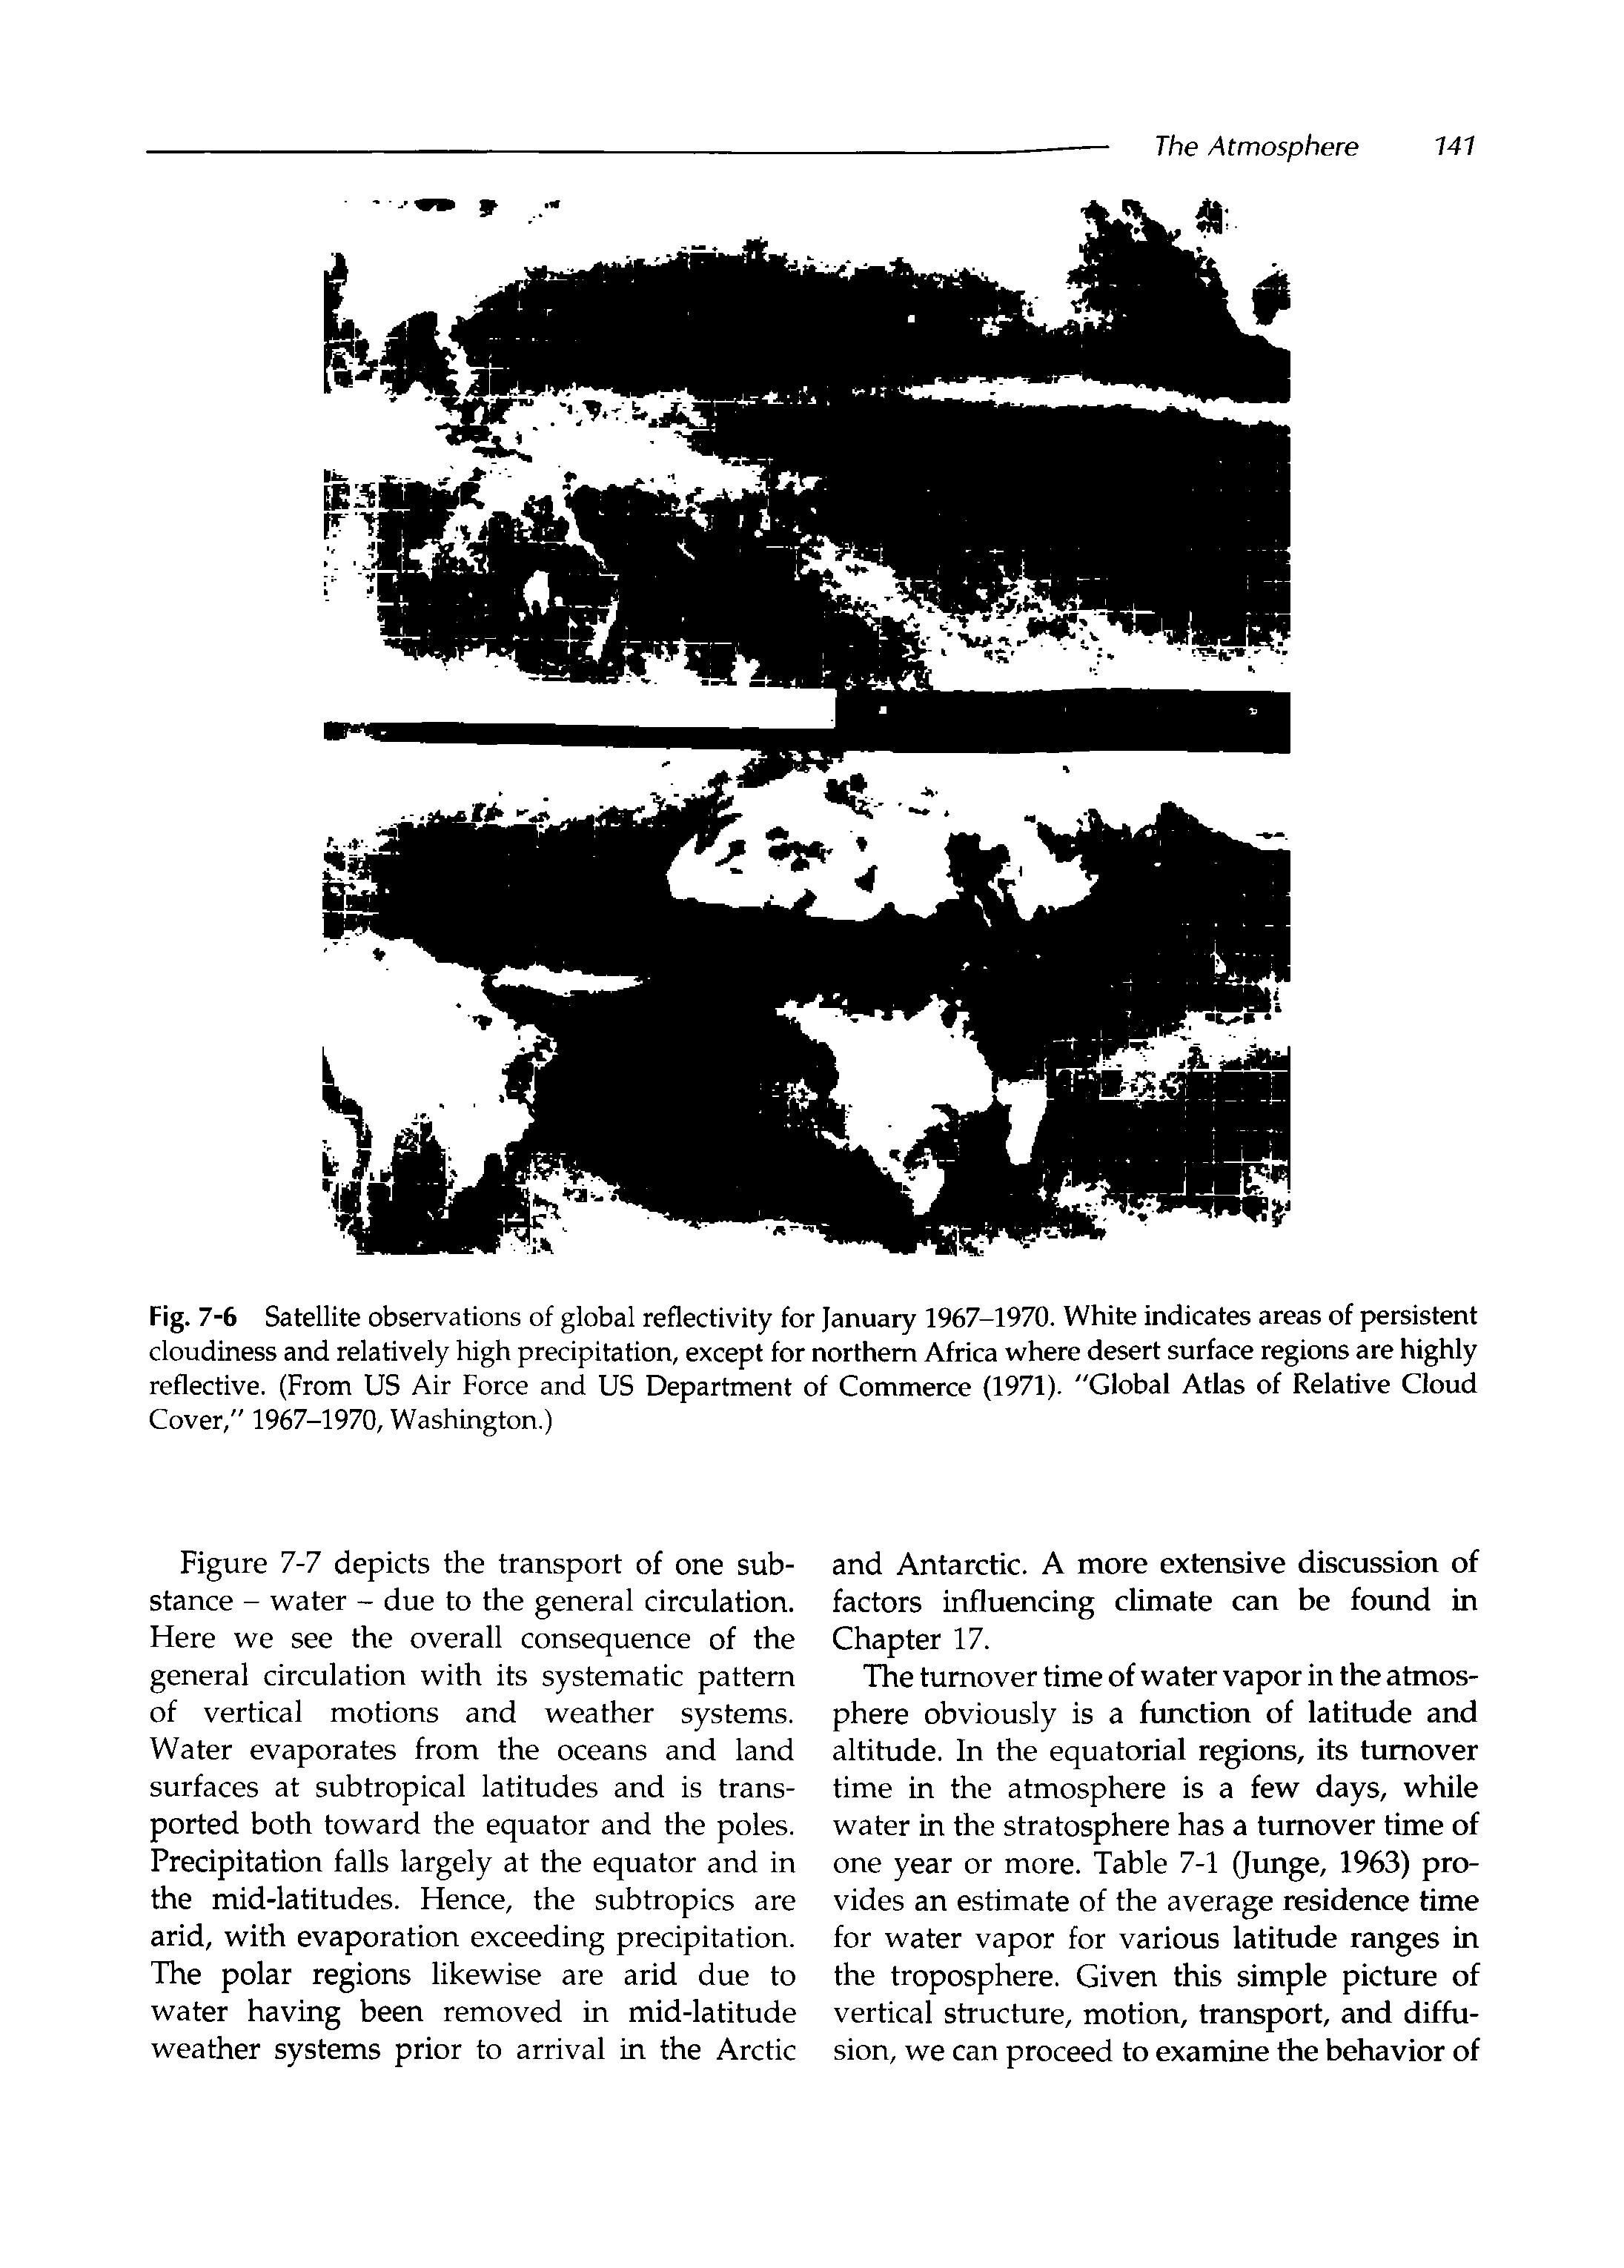 Fig. 7-6 Satellite observations of global reflectivity for January 1967-1970. White indicates areas of persistent cloudiness and relatively high precipitation, except for northern Africa where desert surface regions are highly reflective. (From US Air Force and US Department of Commerce (1971). "Global Atlas of Relative Cloud Cover," 1967-1970, Washington.)...